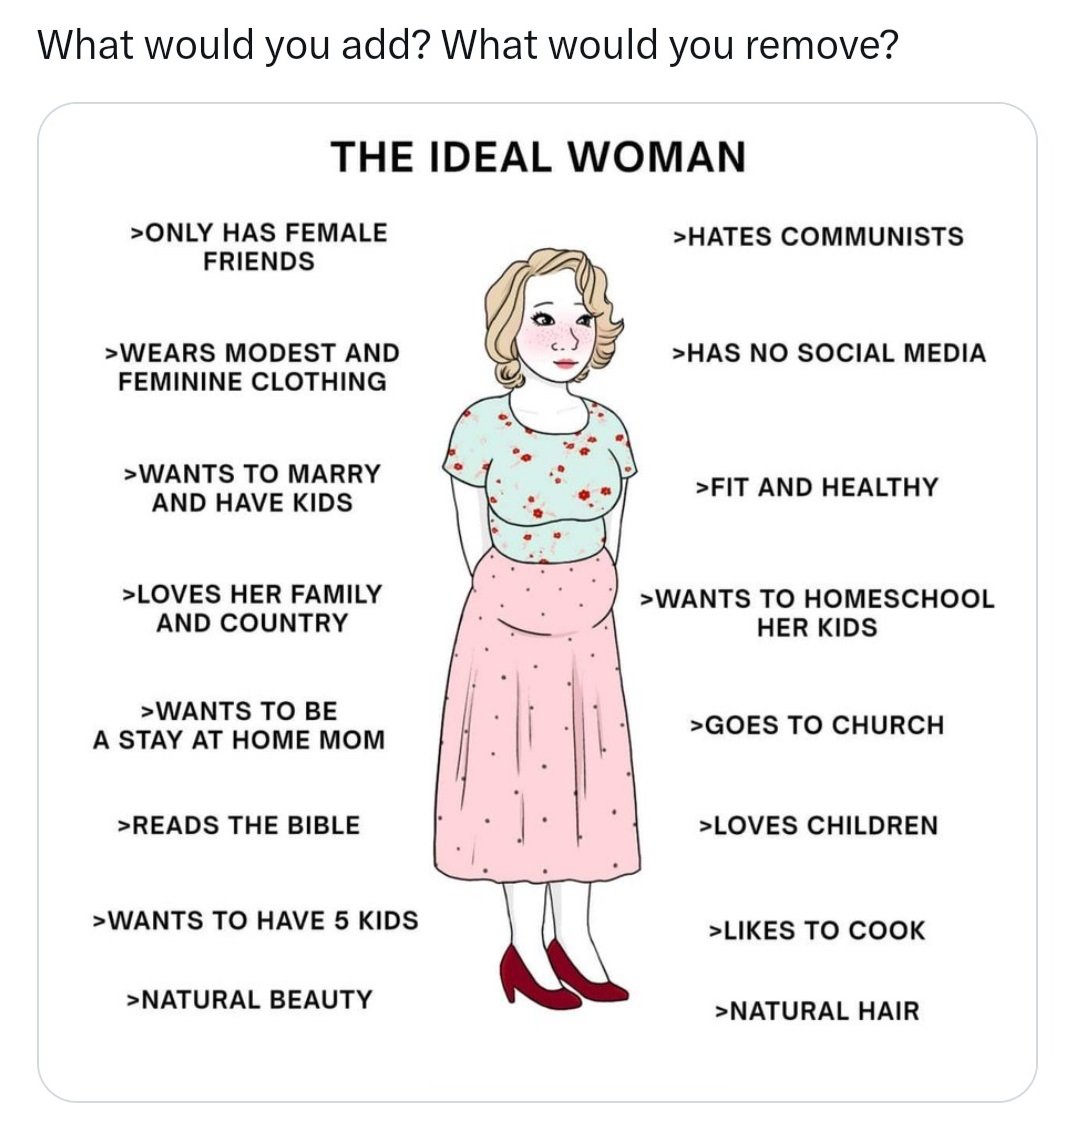 THE IDEAL WOMAN >ONLY HAS FEMALE FRIENDS >HATES COMMUNISTS >WEARS MODEST AND FEMININE CLOTHING >HAS NO SOCIAL MEDIA >WANTS TO MARRY AND HAVE KIDS >FIT AND HEALTHY >LOVES HER FAMILY AND COUNTRY >WANTS TO HOMESCHOOL HER KIDS >WANTS TO BE A STAY AT HOME MOM >GOES TO CHURCH >READS THE BIBLE >WANTS TO HAVE 5 KIDS >LOVES CHILDREN >LIKES TO COOK >NATURAL BEAUTY >NATURAL HAIR